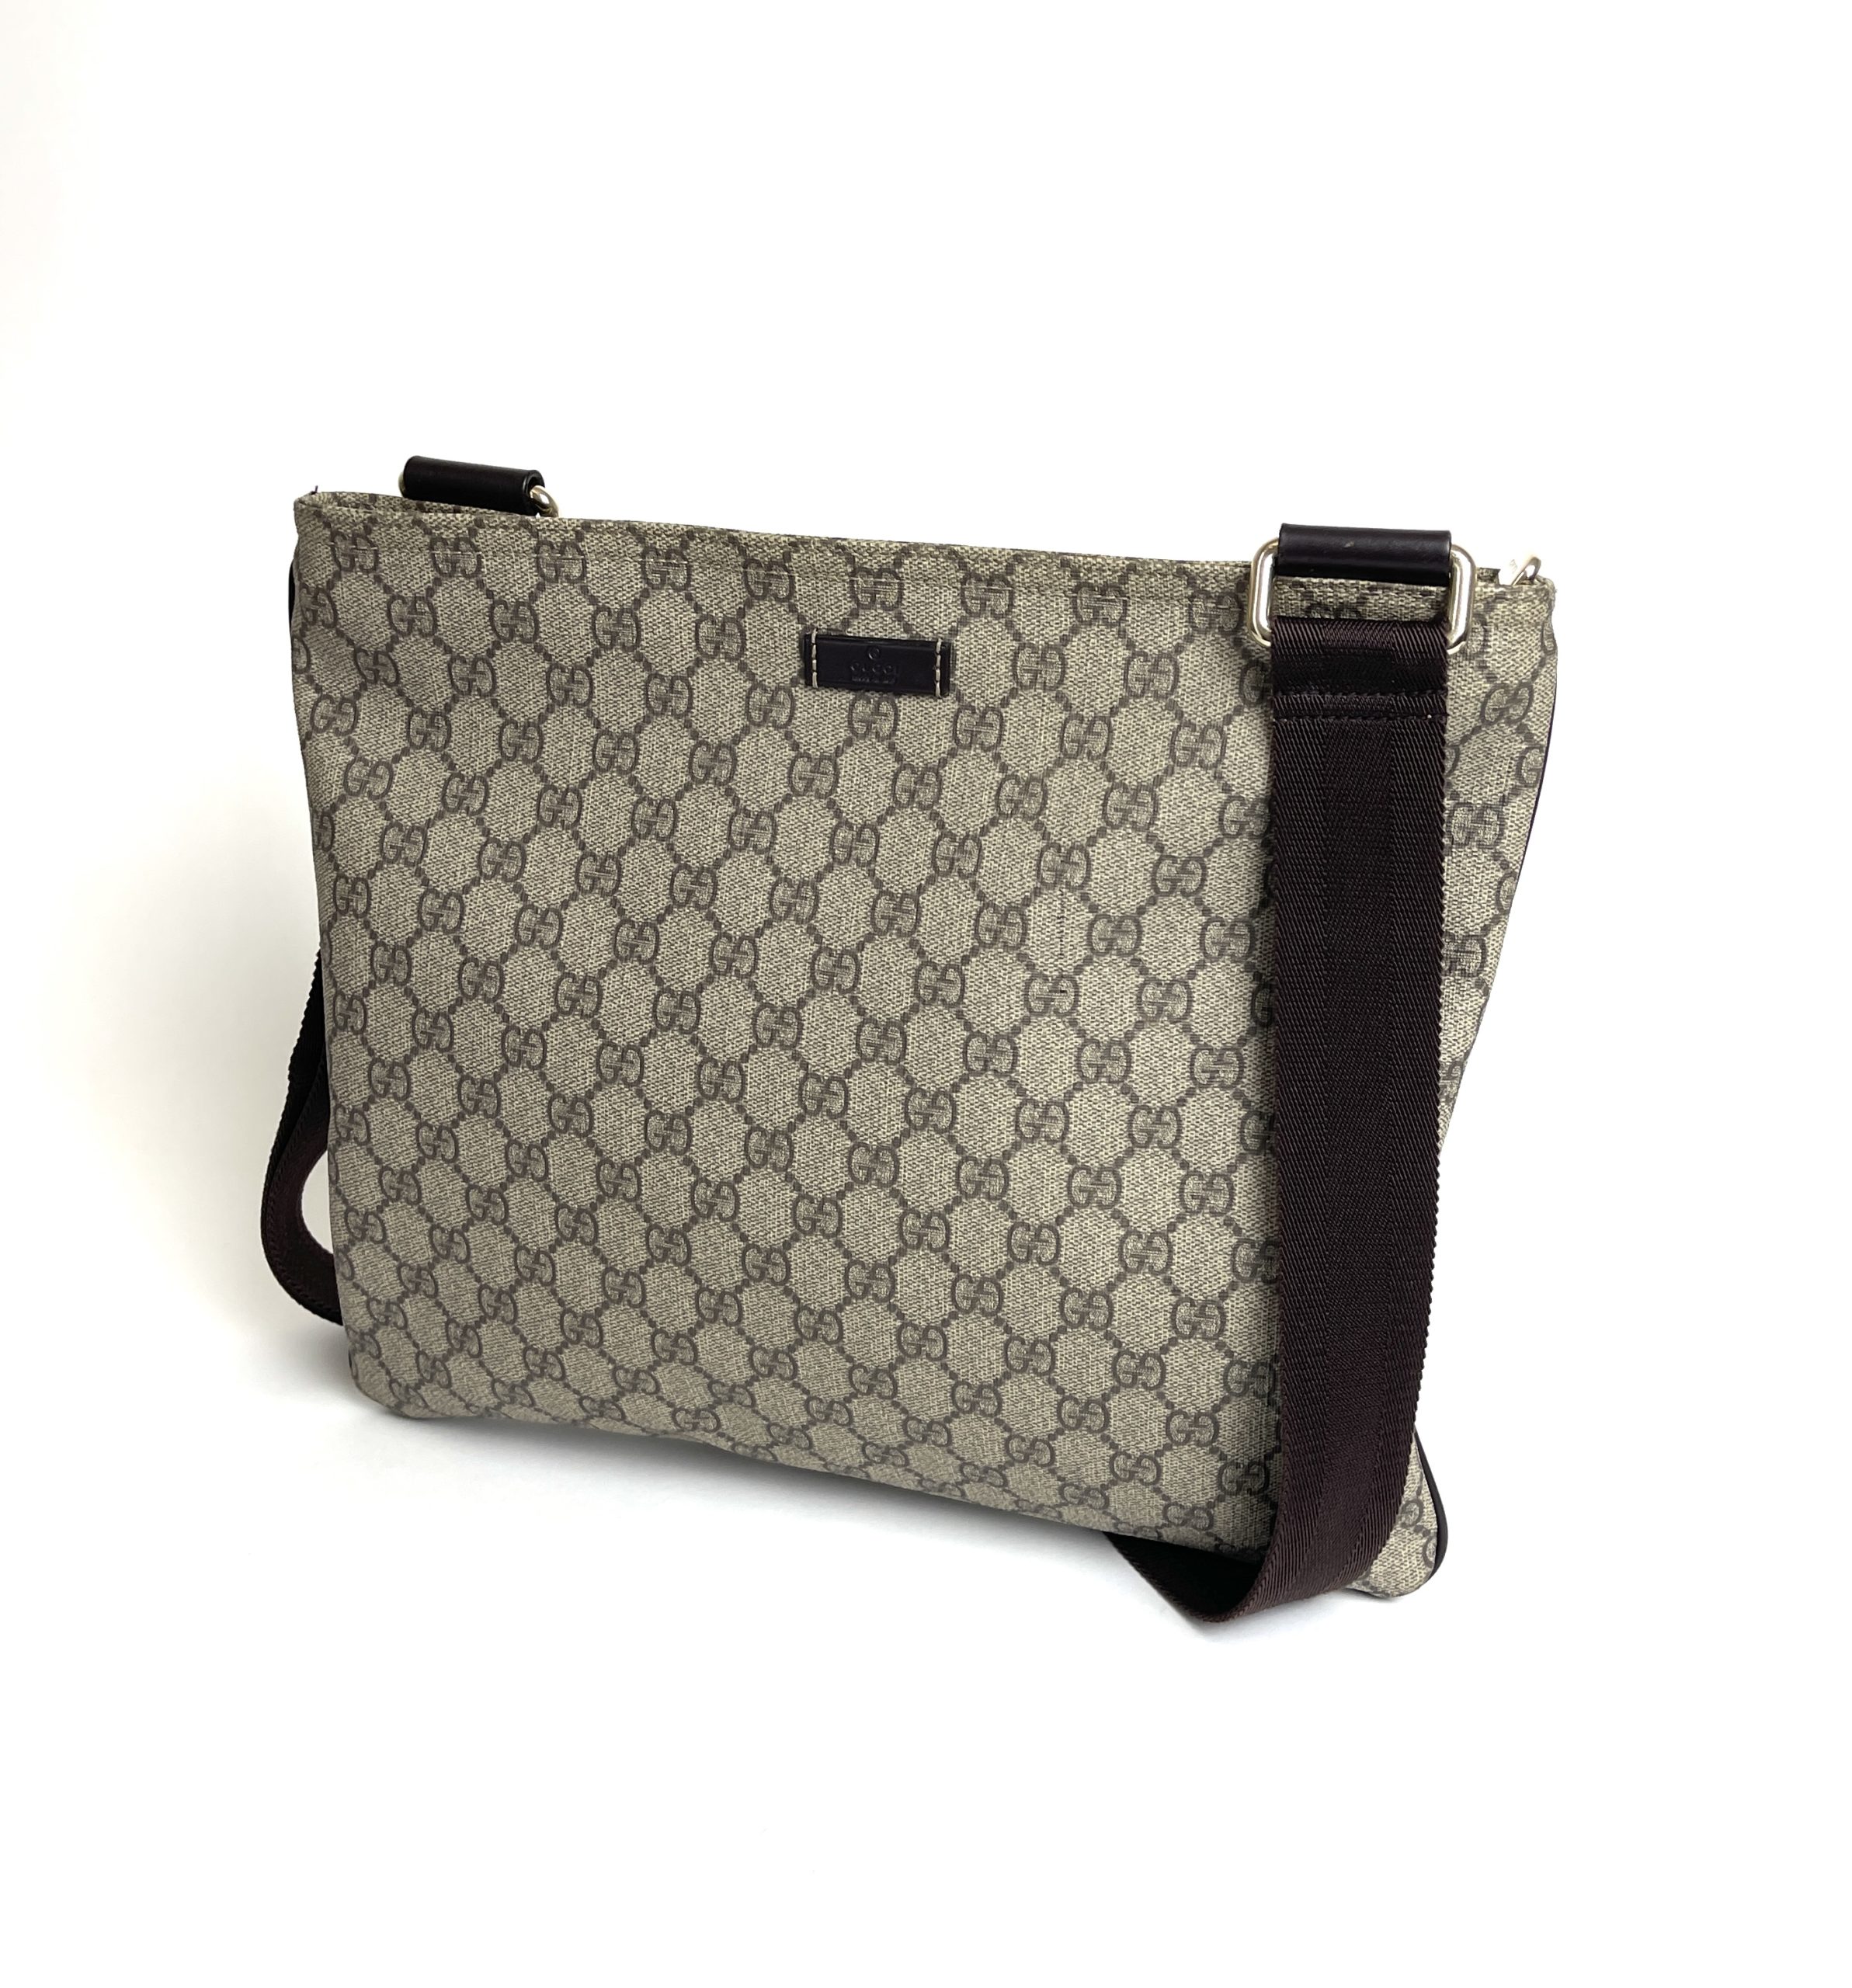 Gucci Flap Messenger Bag GG Coated Canvas with Leather Medium